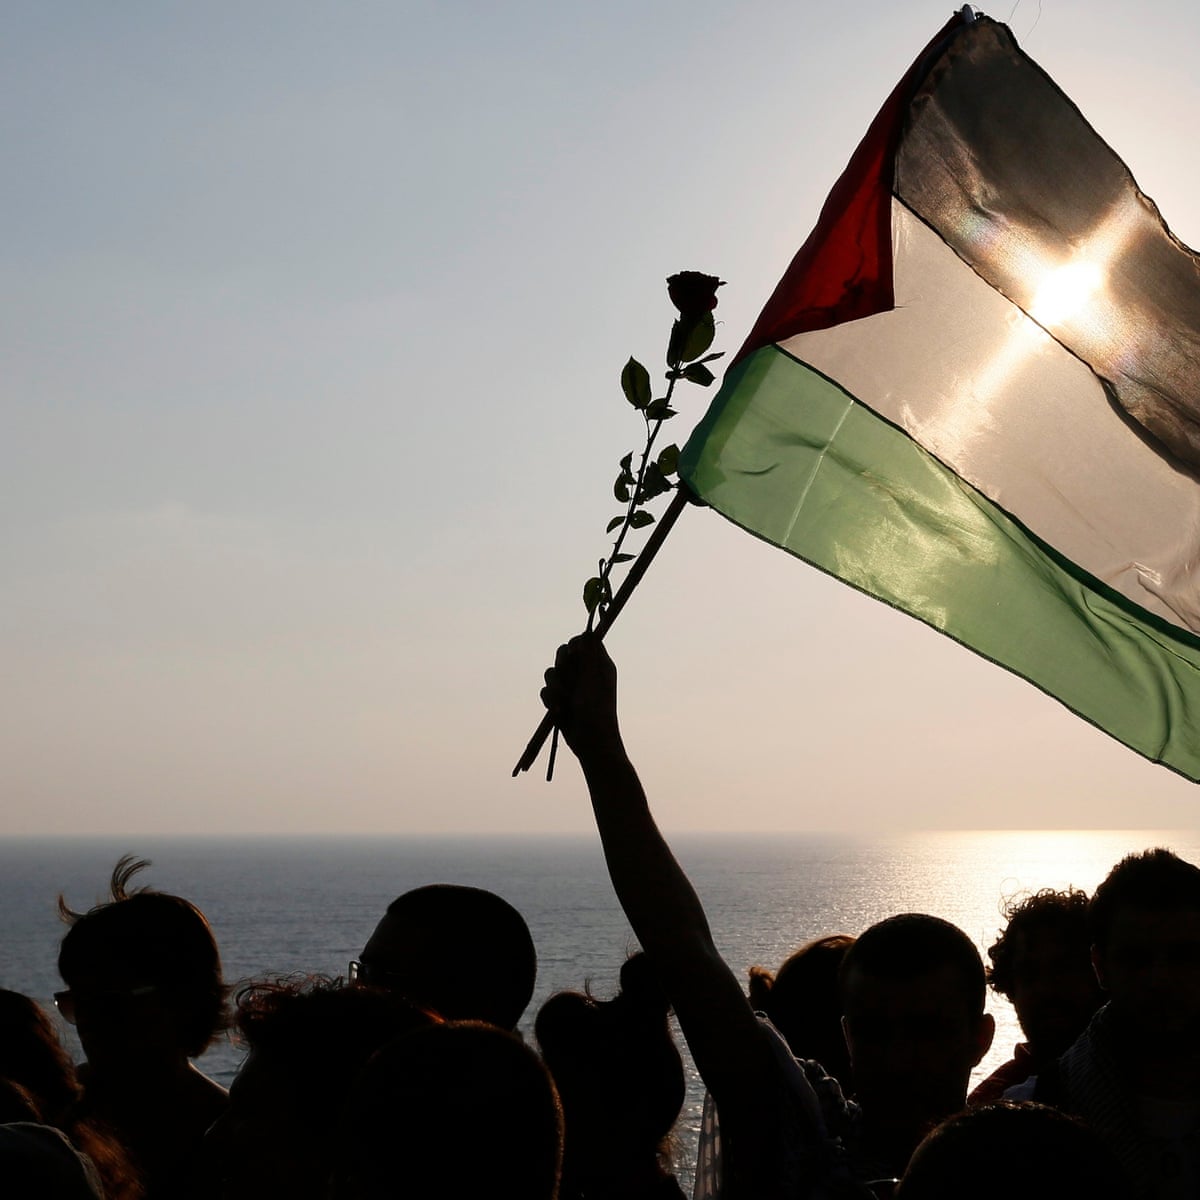 Palestine flag to fly at UN headquarters after majority vote